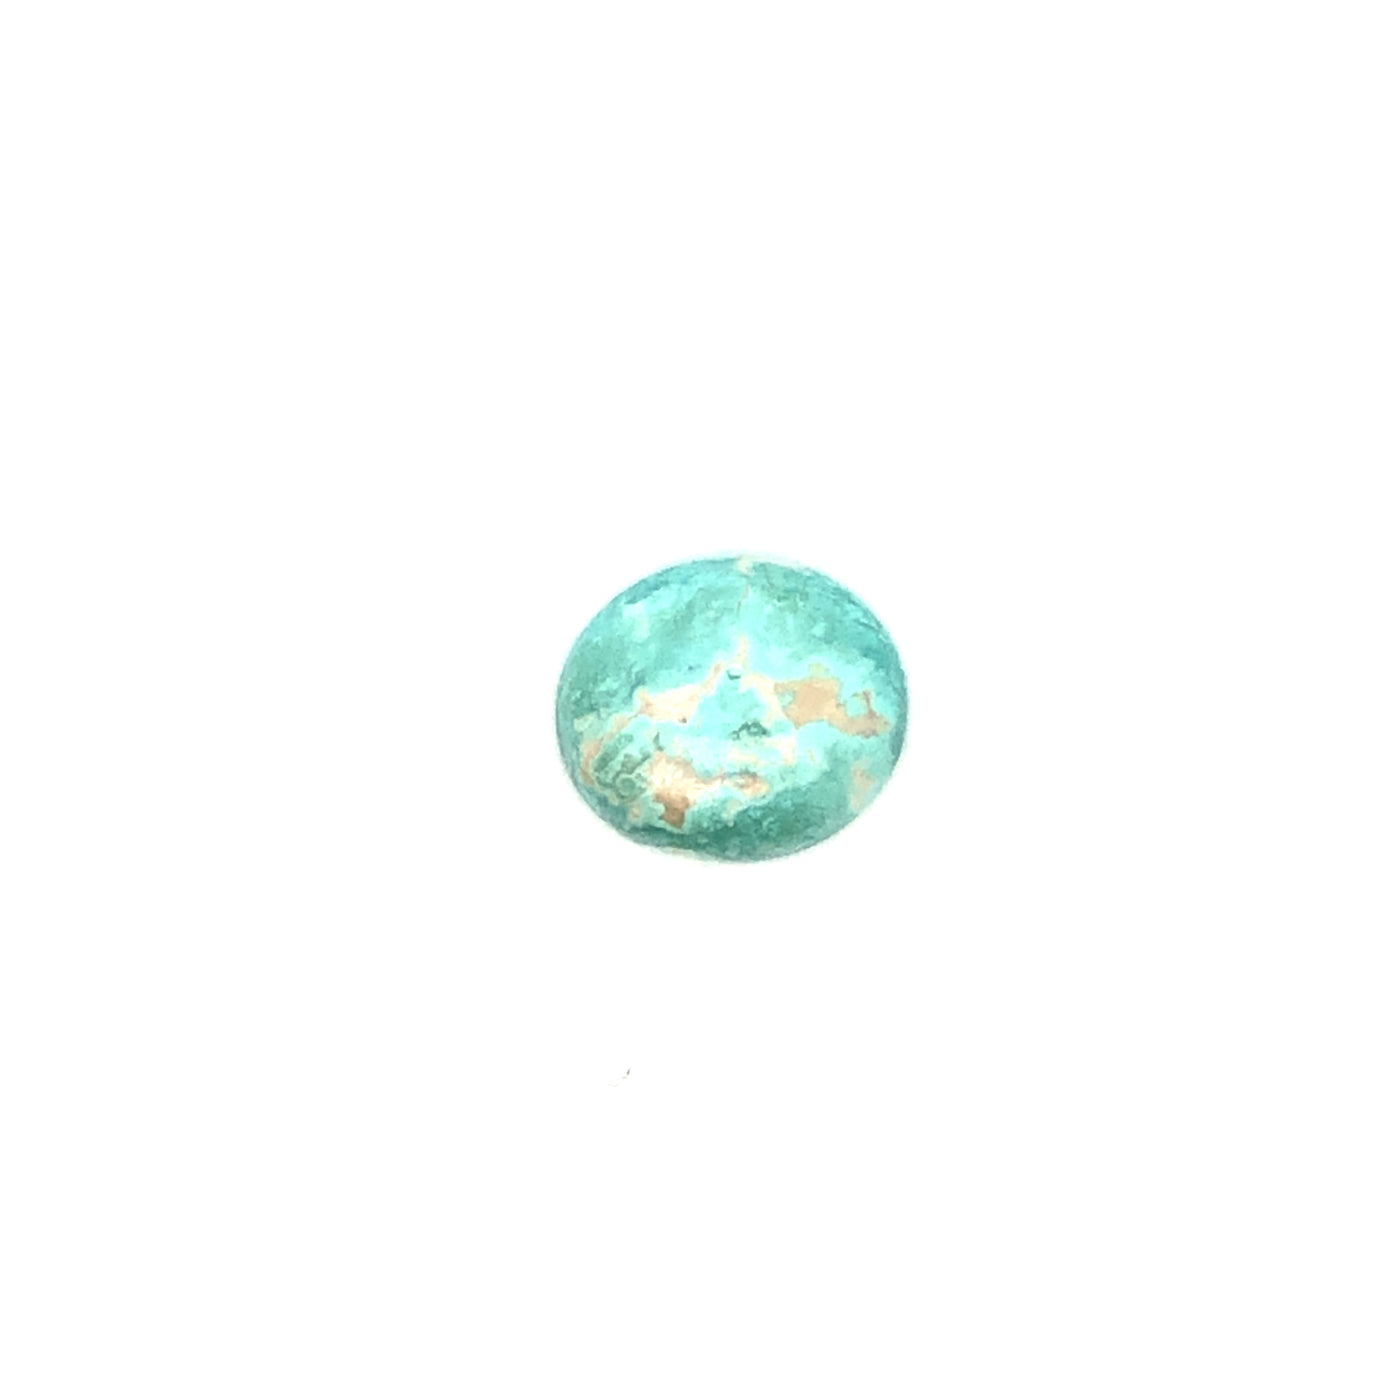 Loose Narooma Turquoise Oval Shaped 6.62Ct Blue With Some White